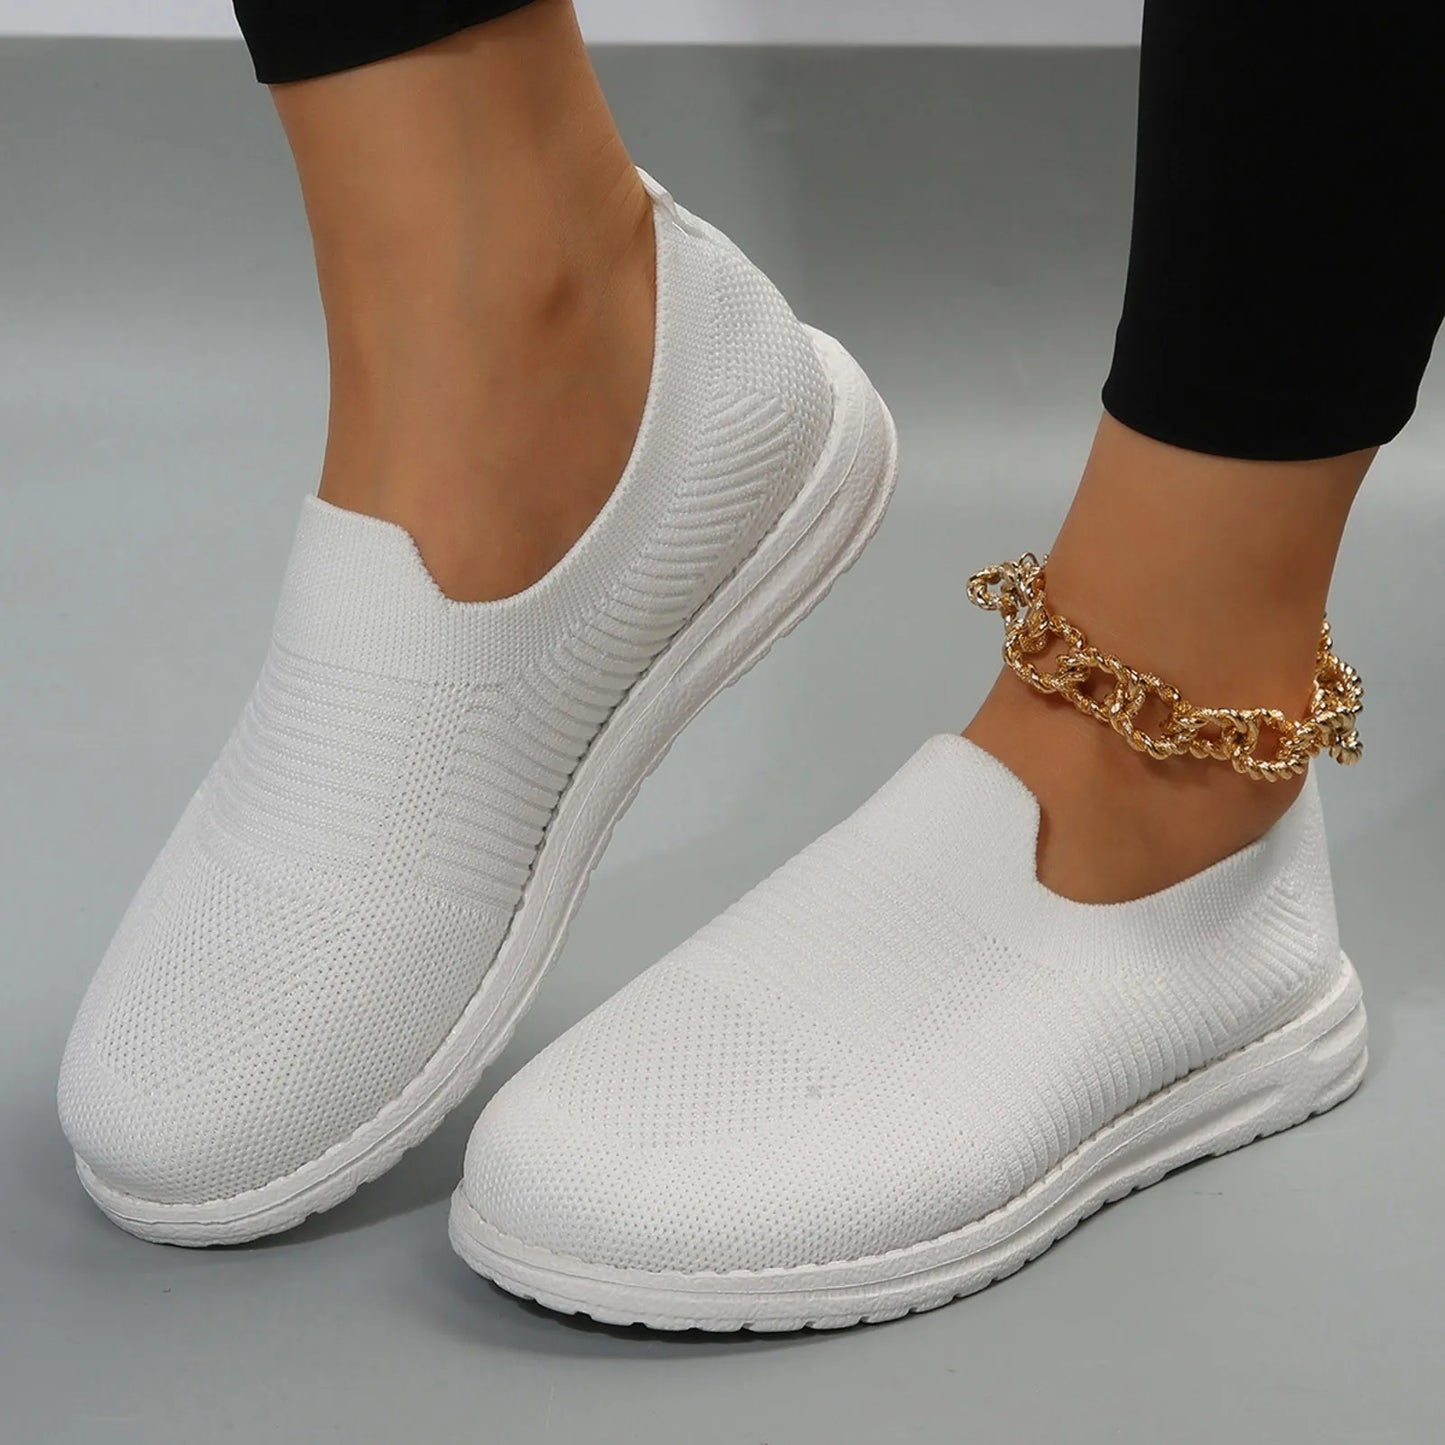 Ladies Slip-On Mesh Shoes Sports Casual Shoes Breathable/Plus Size Lightweight Running Women's Casual Work Sneakers